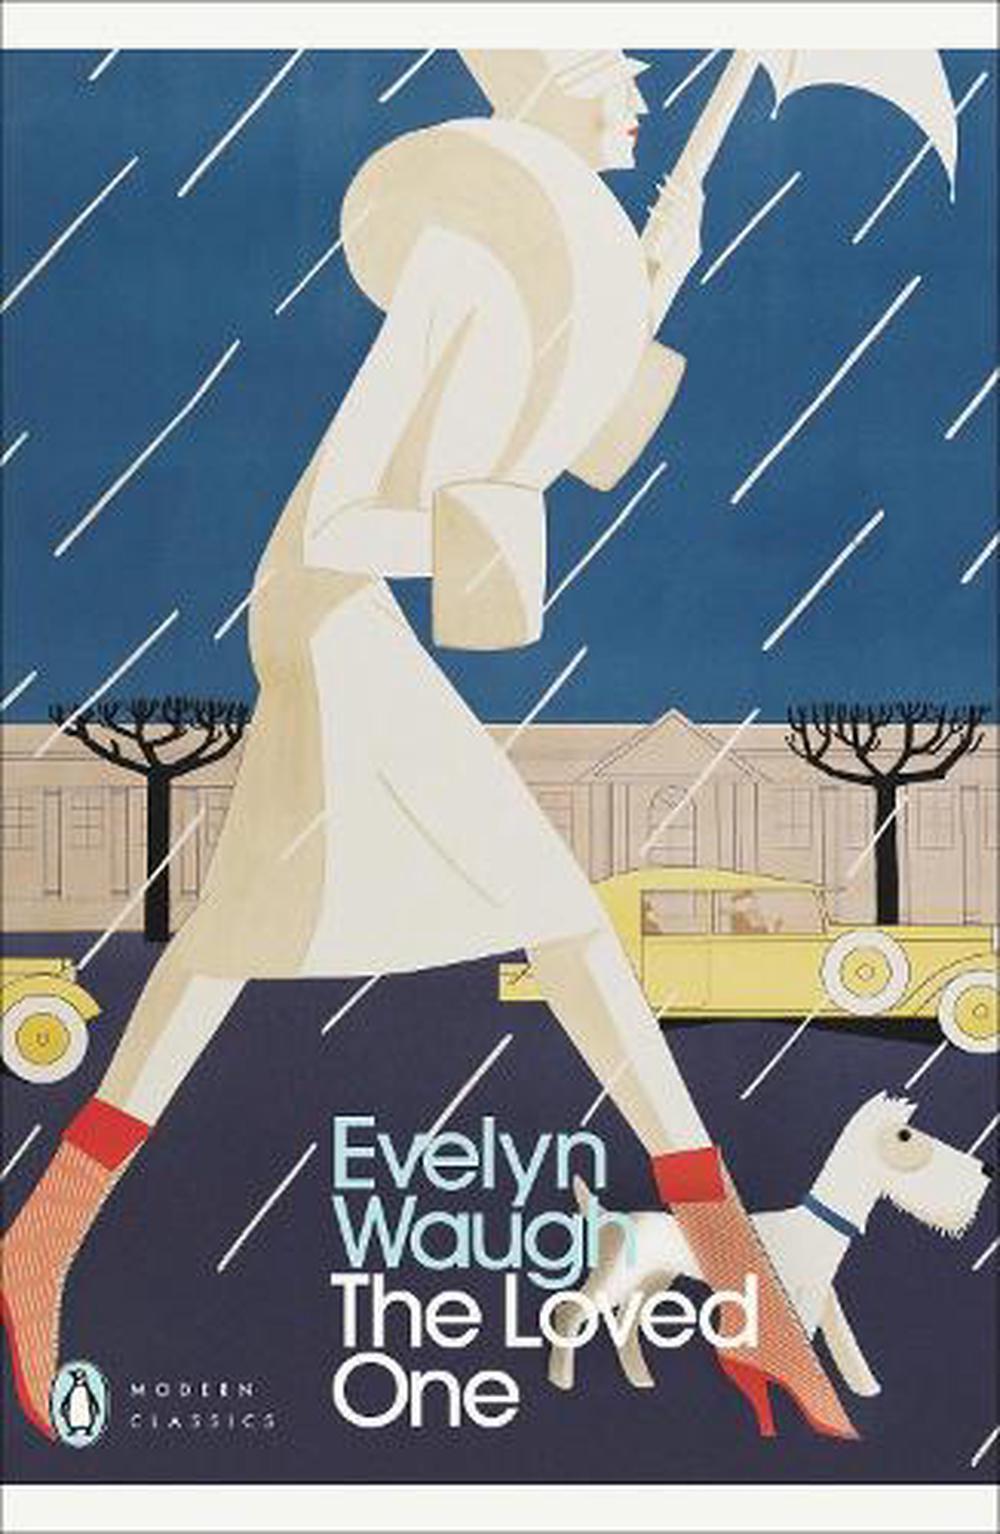 The Loved One by Evelyn Waugh, Paperback, 9780141184241 | Buy online at ...